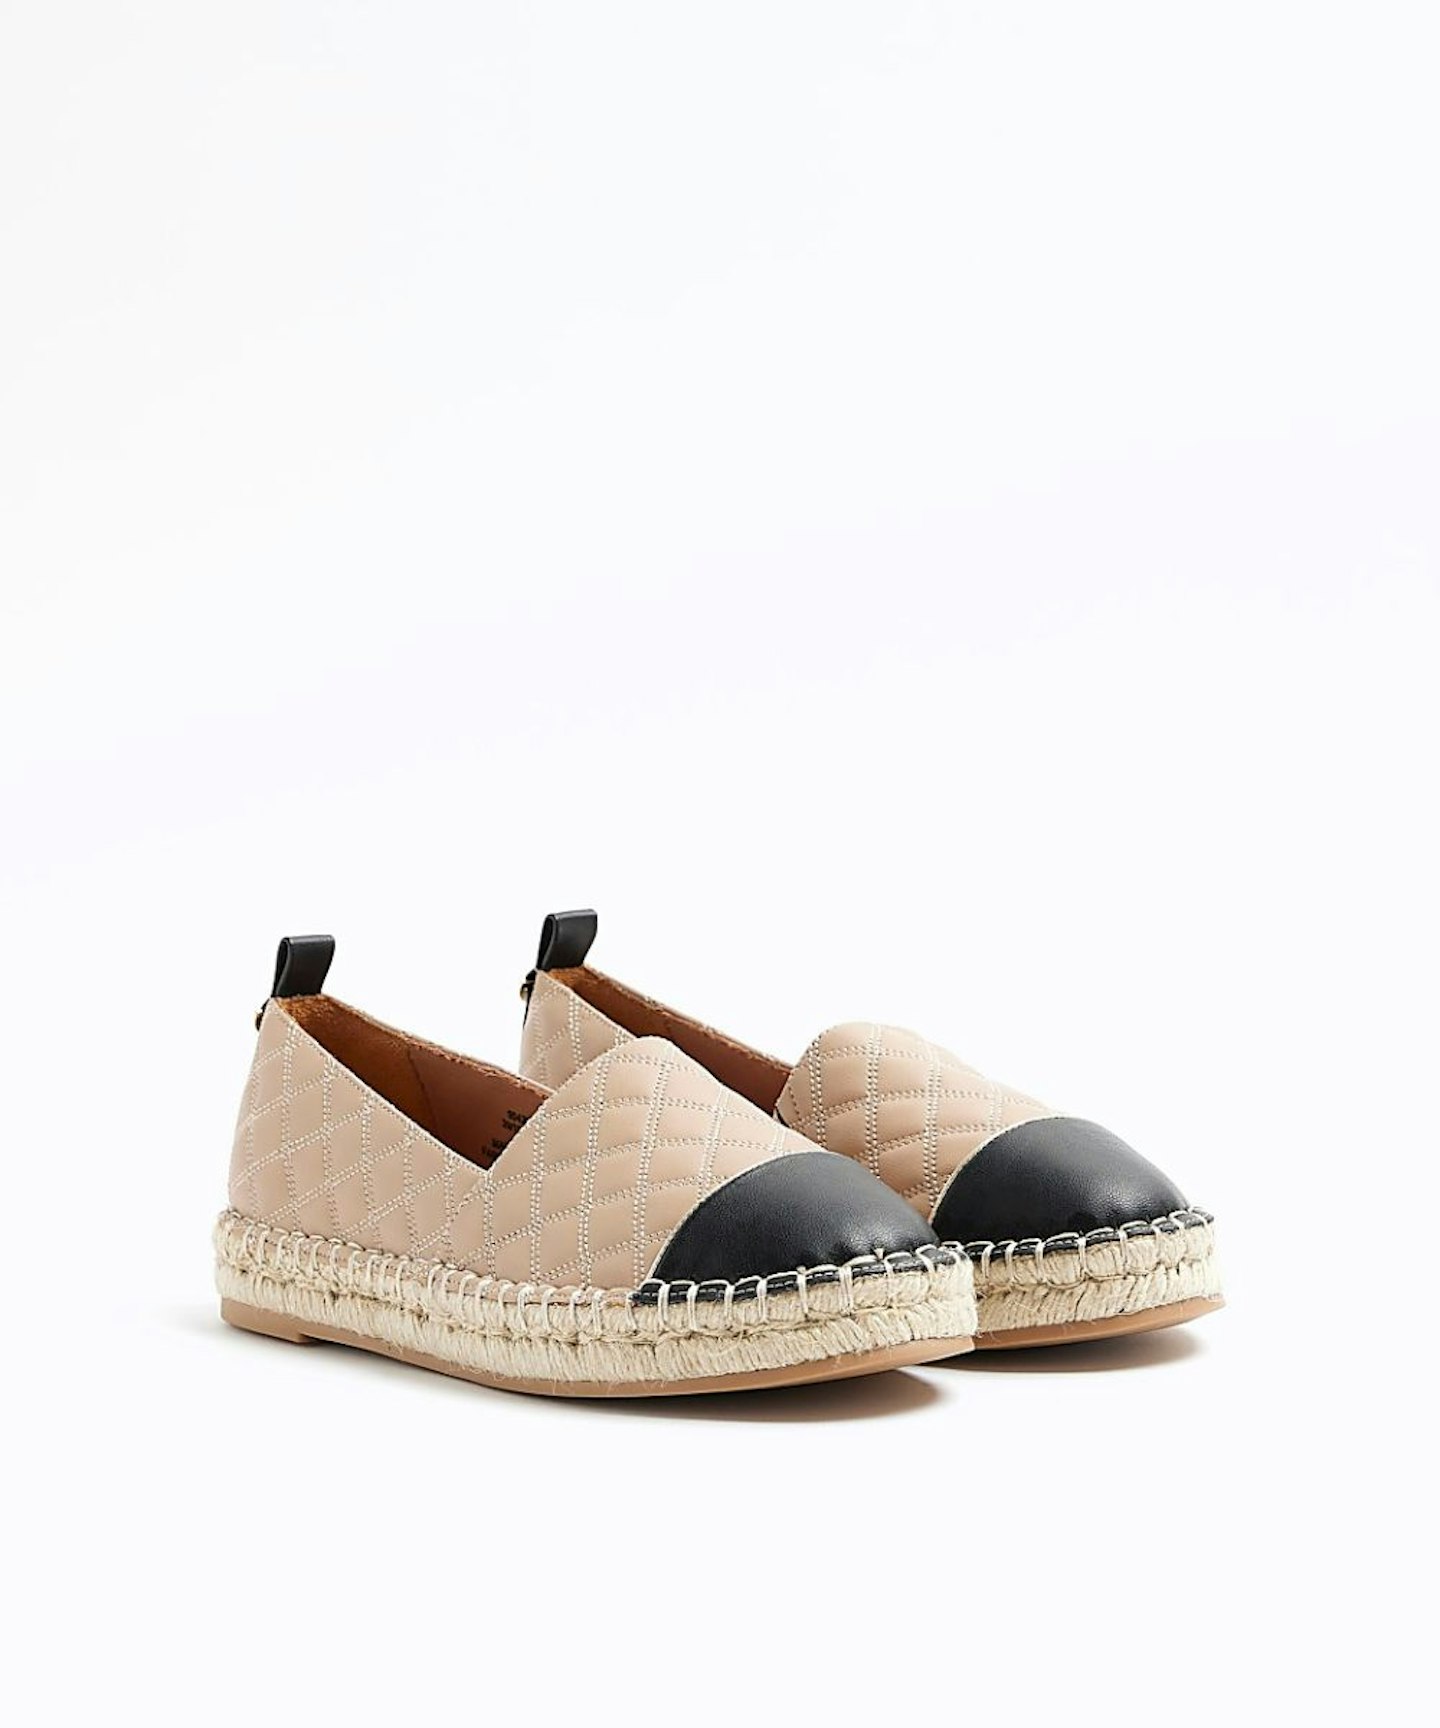 River Island, Beige Wide Fit Quilted Espadrille Shoes